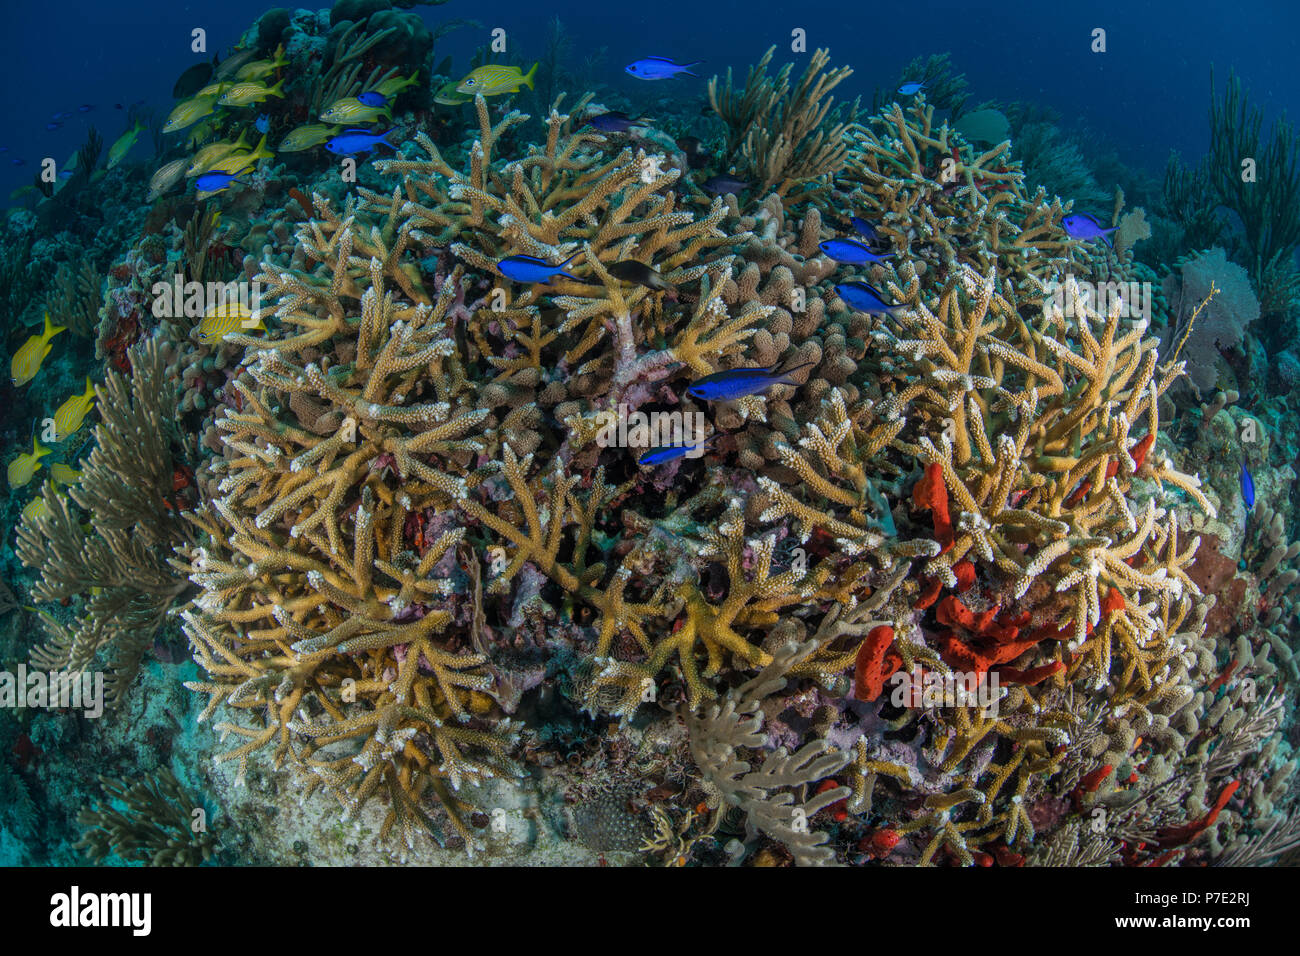 Staghorn coral and colorful fish, Puerto Morelos, Quintana Roo, Mexico Stock Photo